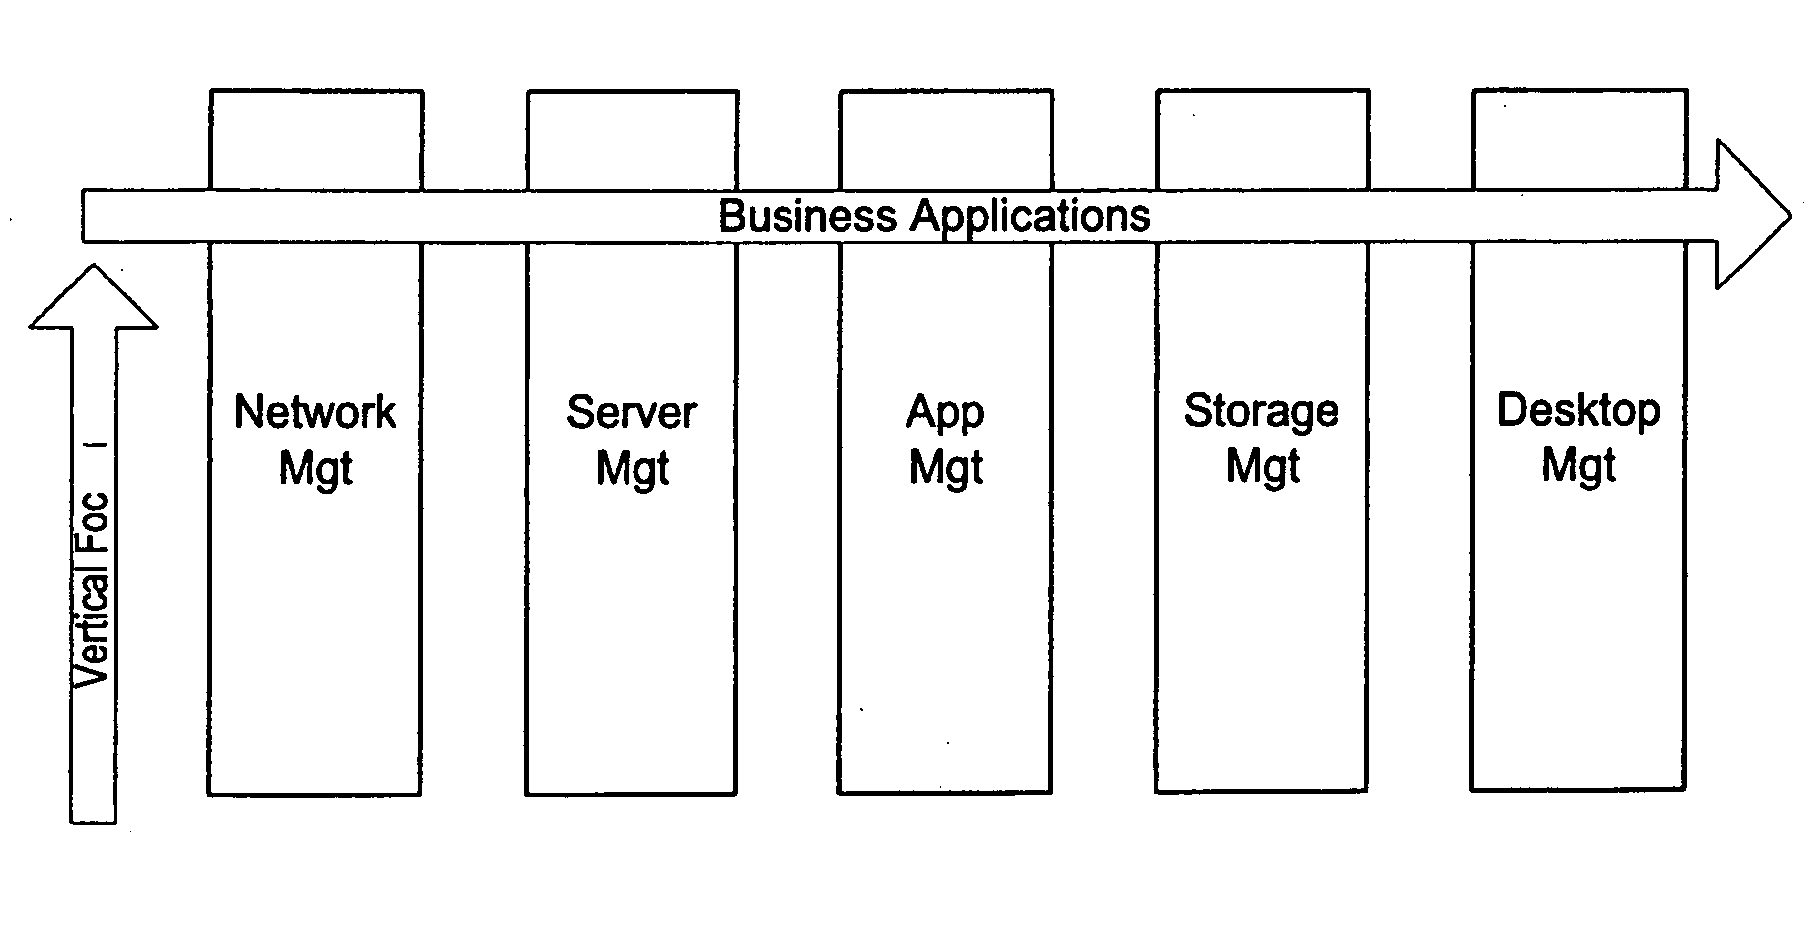 Automated application discovery and analysis system and method